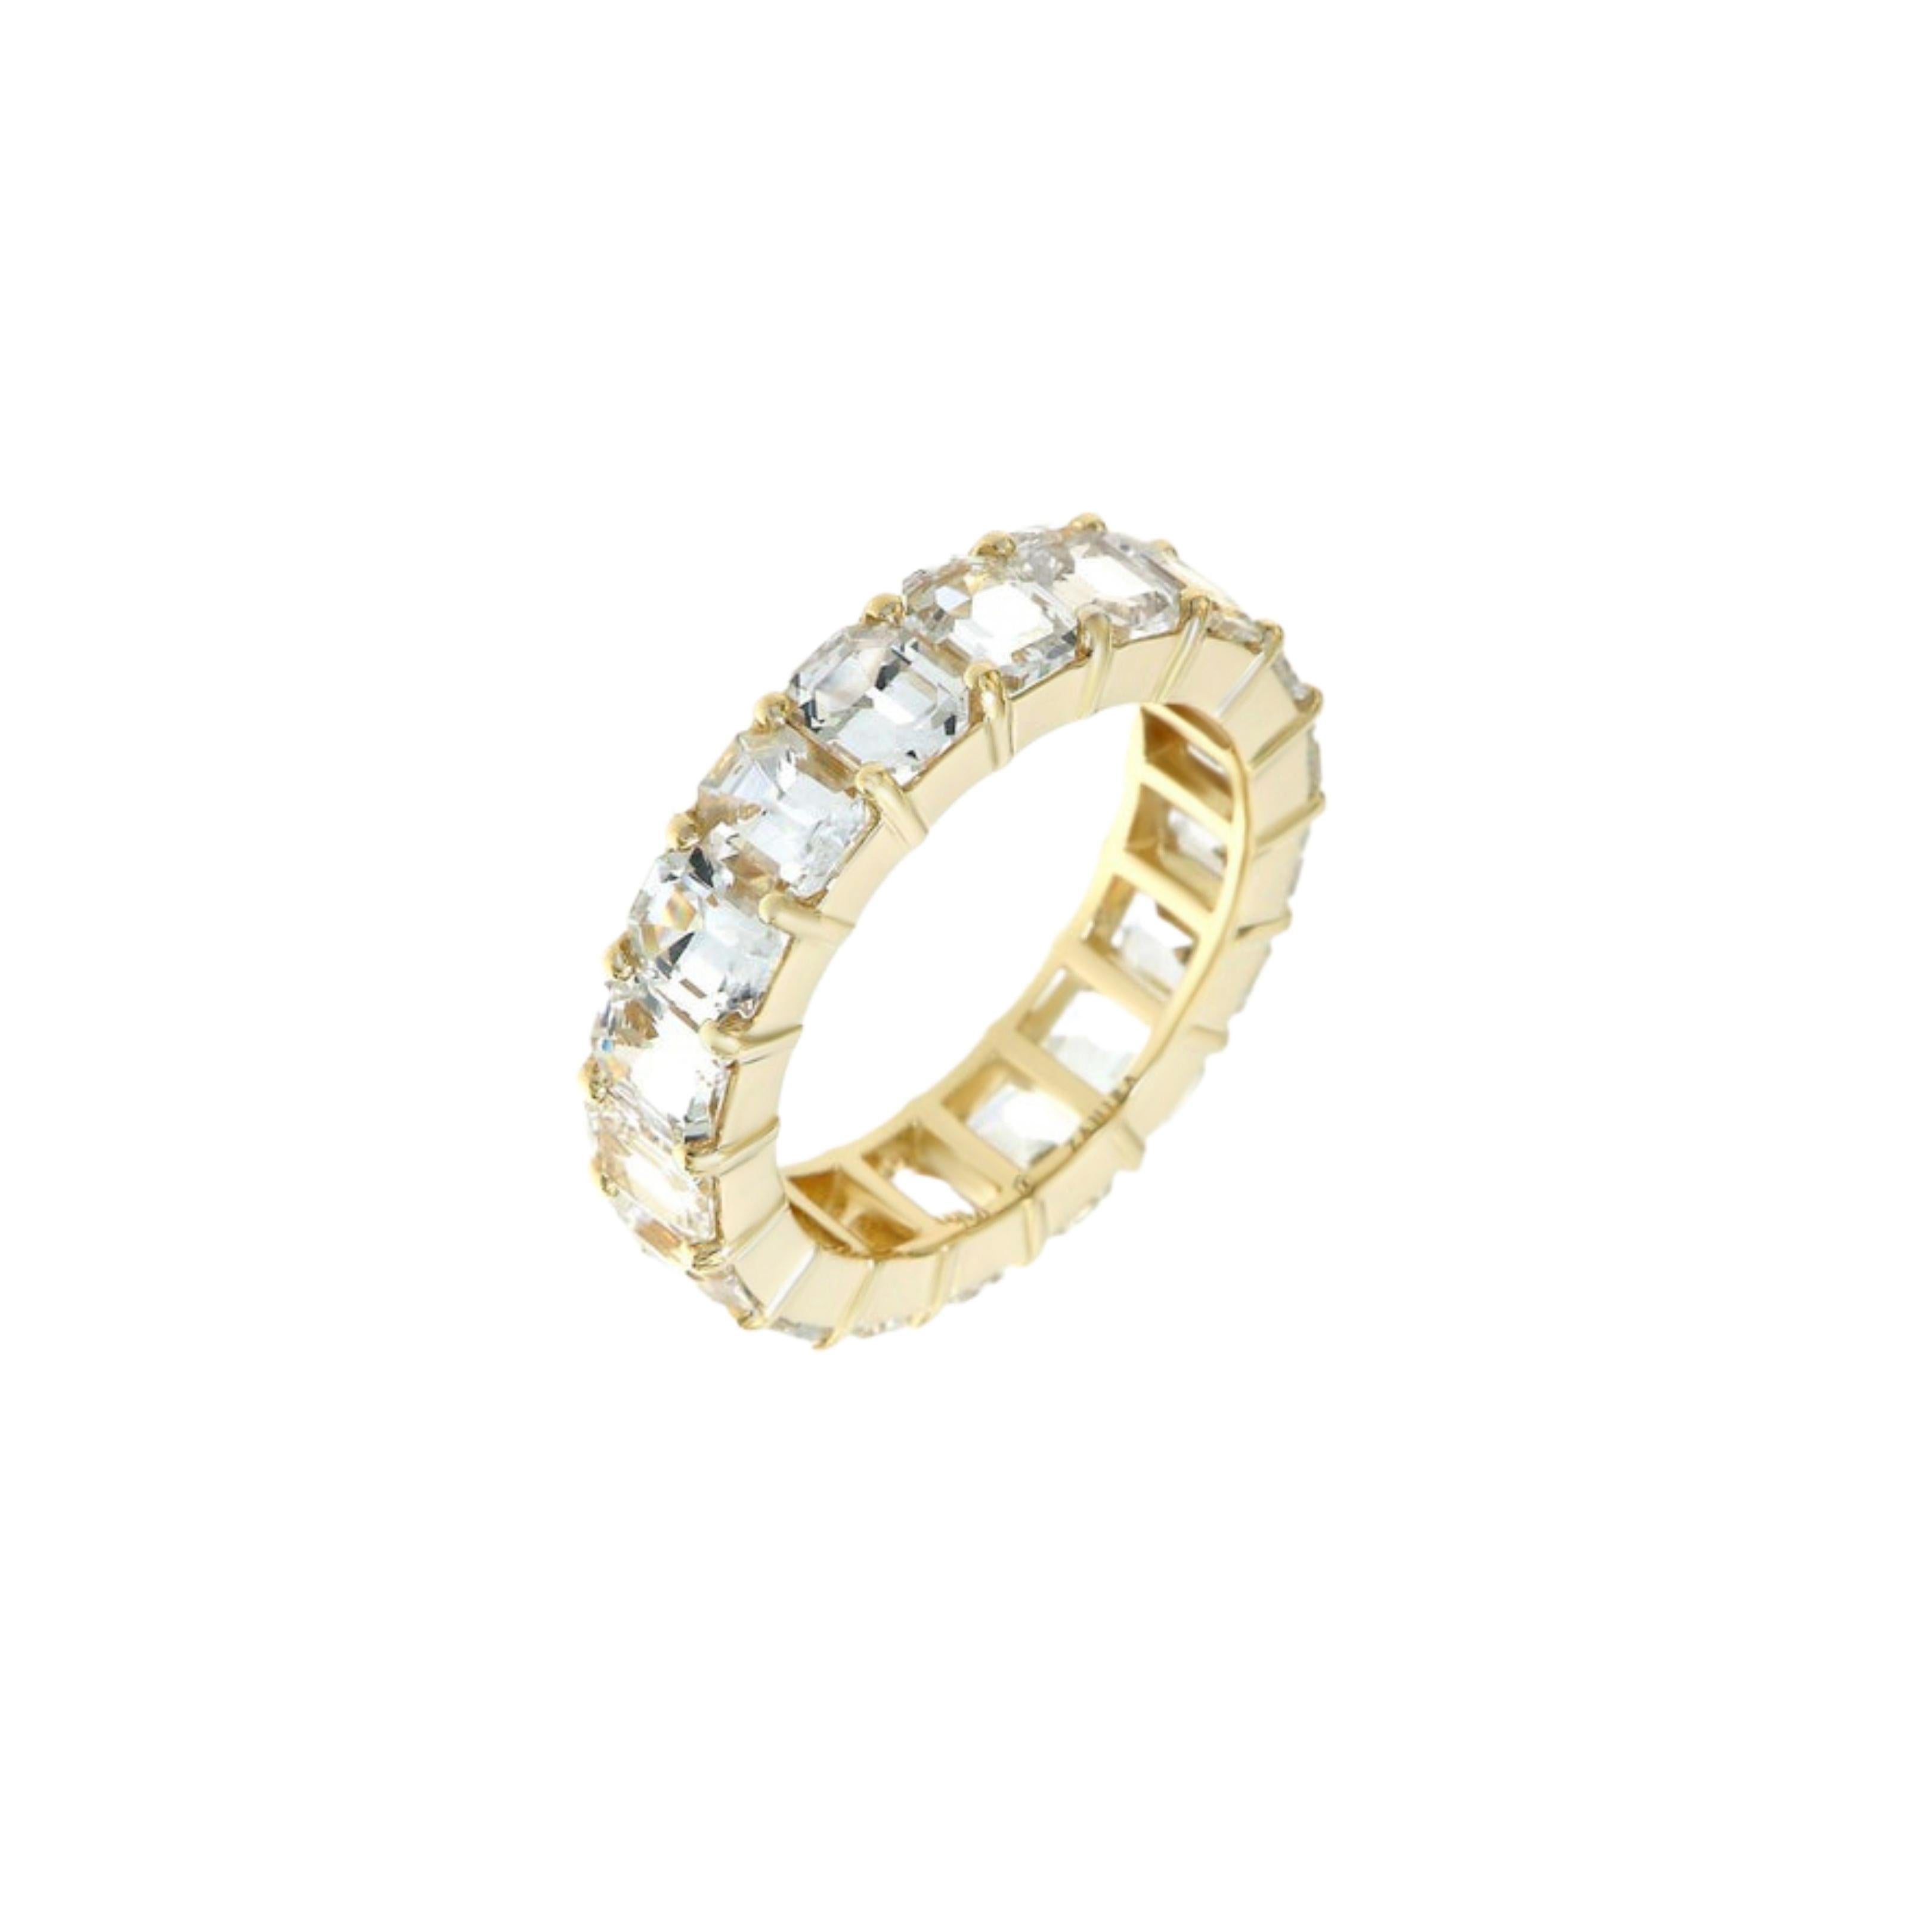 For Sale:  10.96 Carat Emerald Cut White Sapphire Eternity Band in 18 Karat Yellow Gold 2